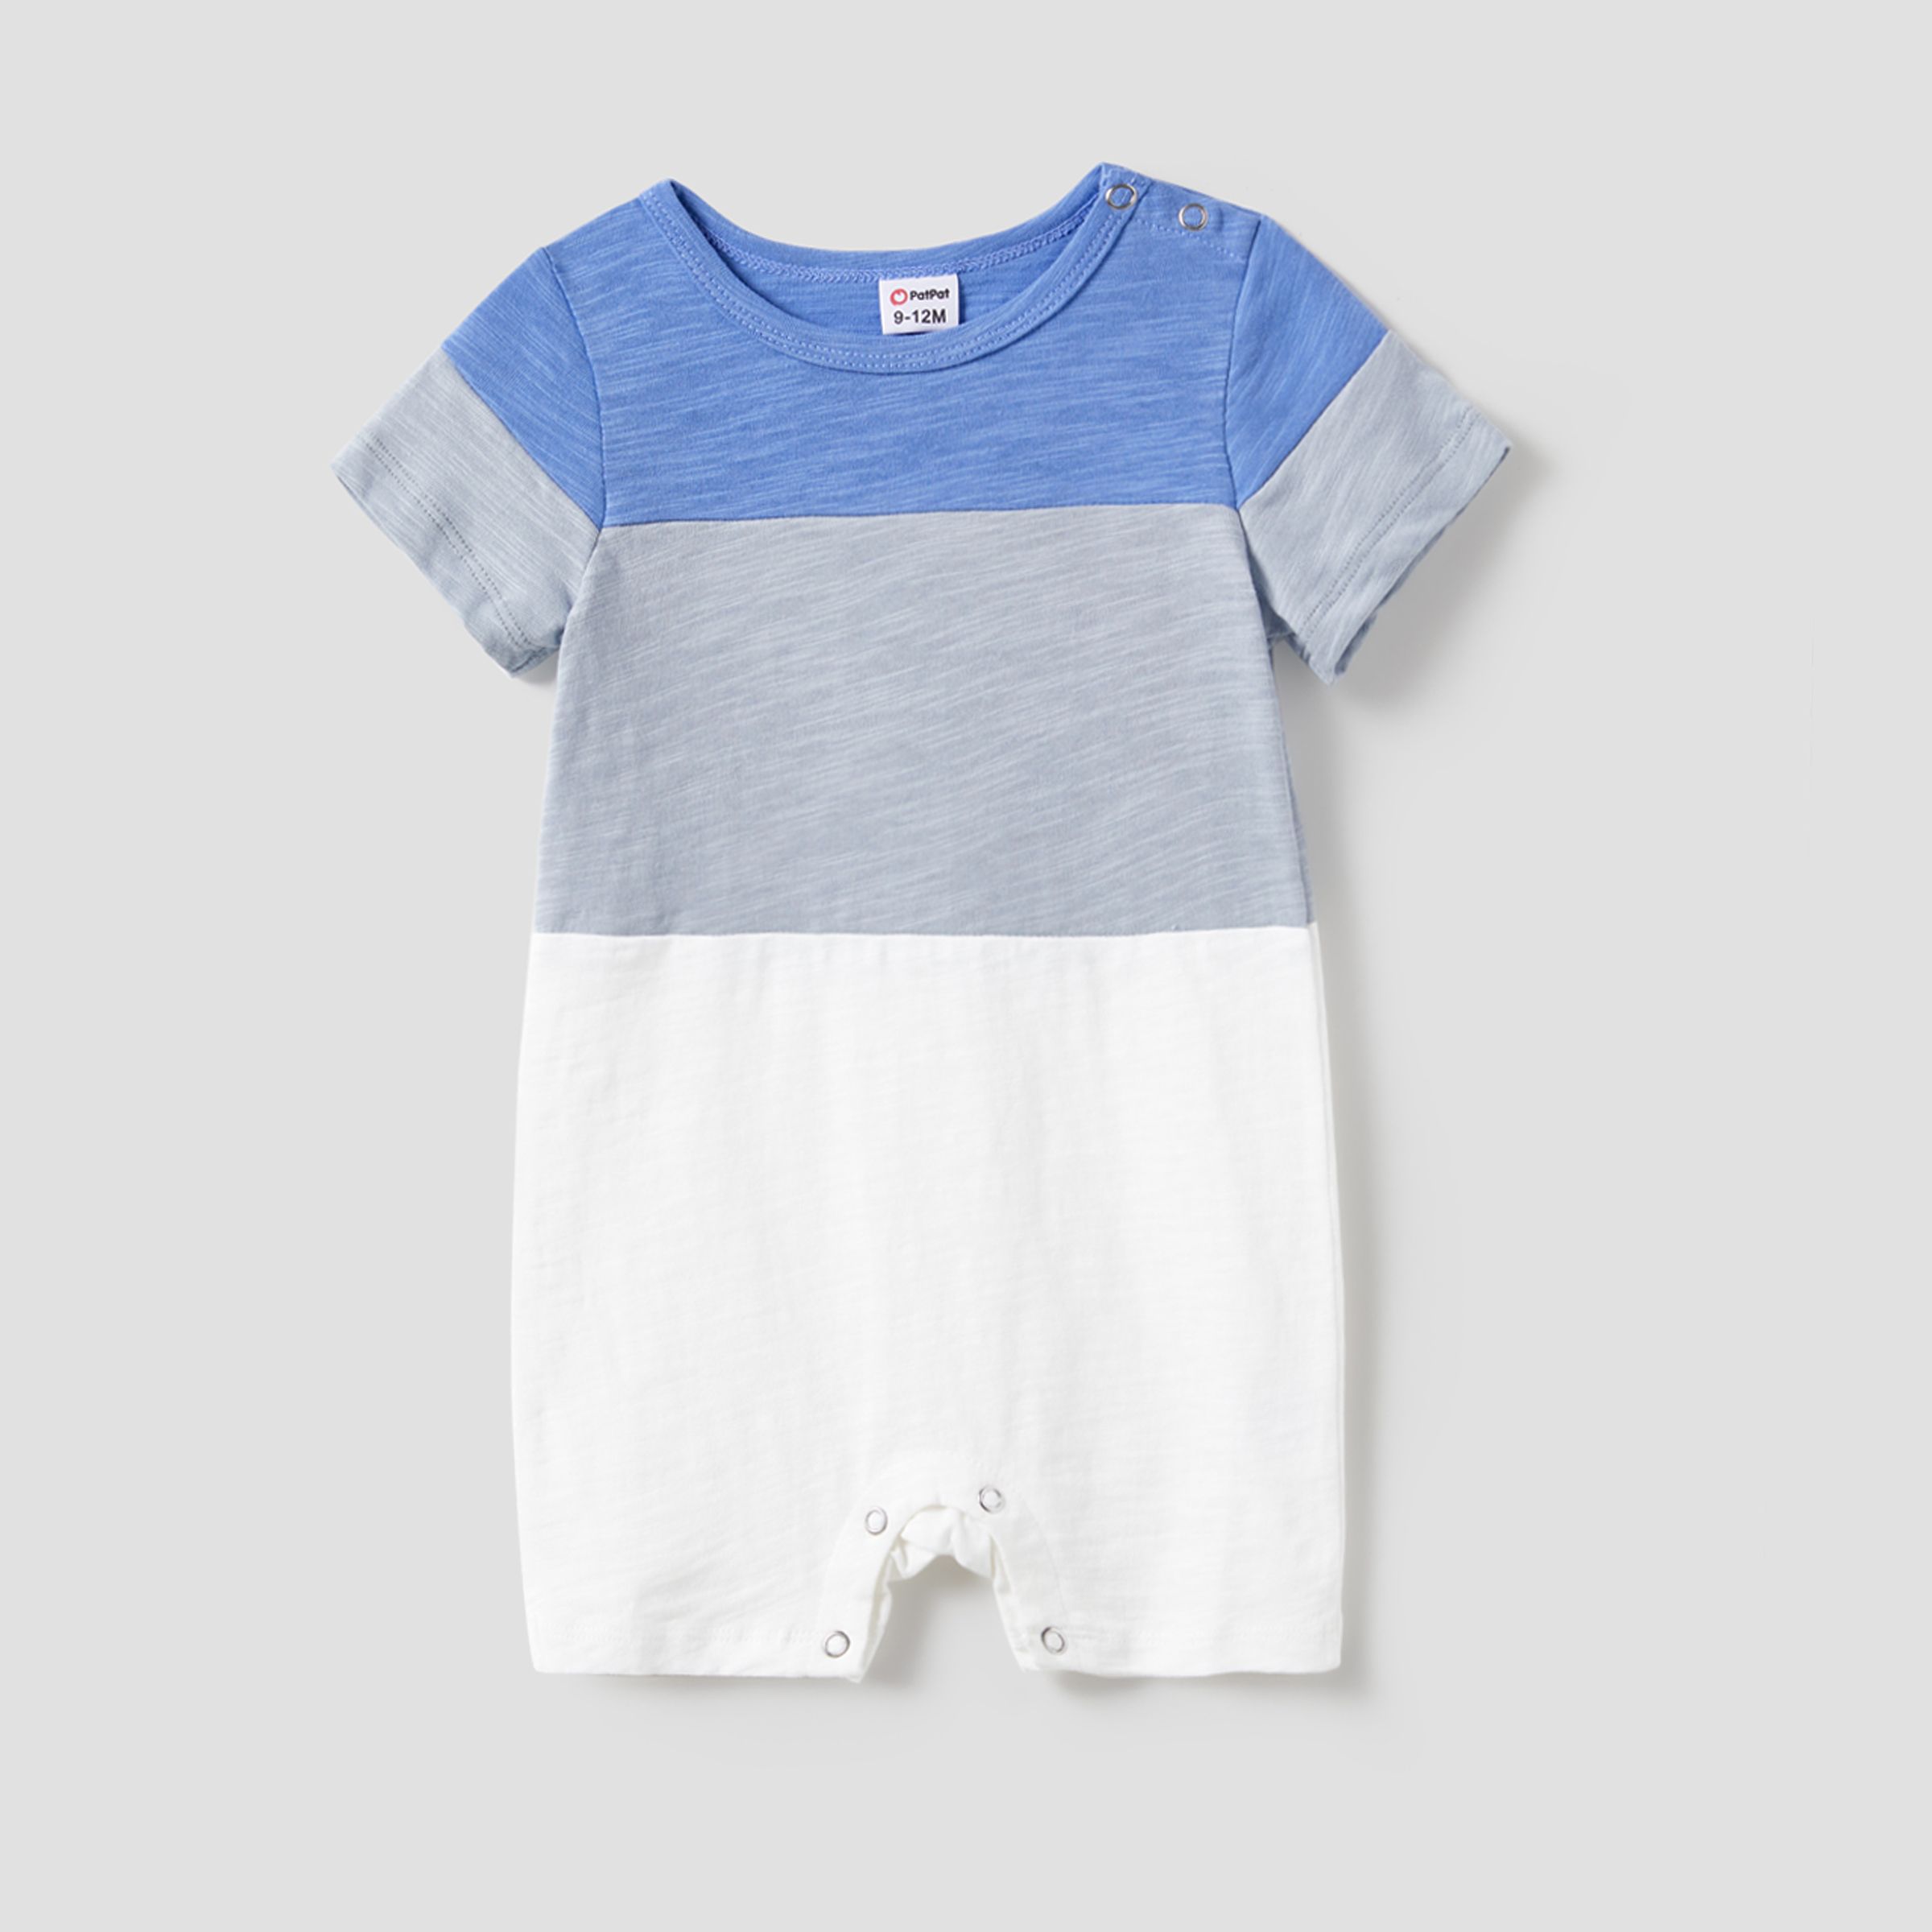 Family Matching Cotton Colorblock Tee And Tank A-line Dress With Drawstring, Pockets And Buttons Sets